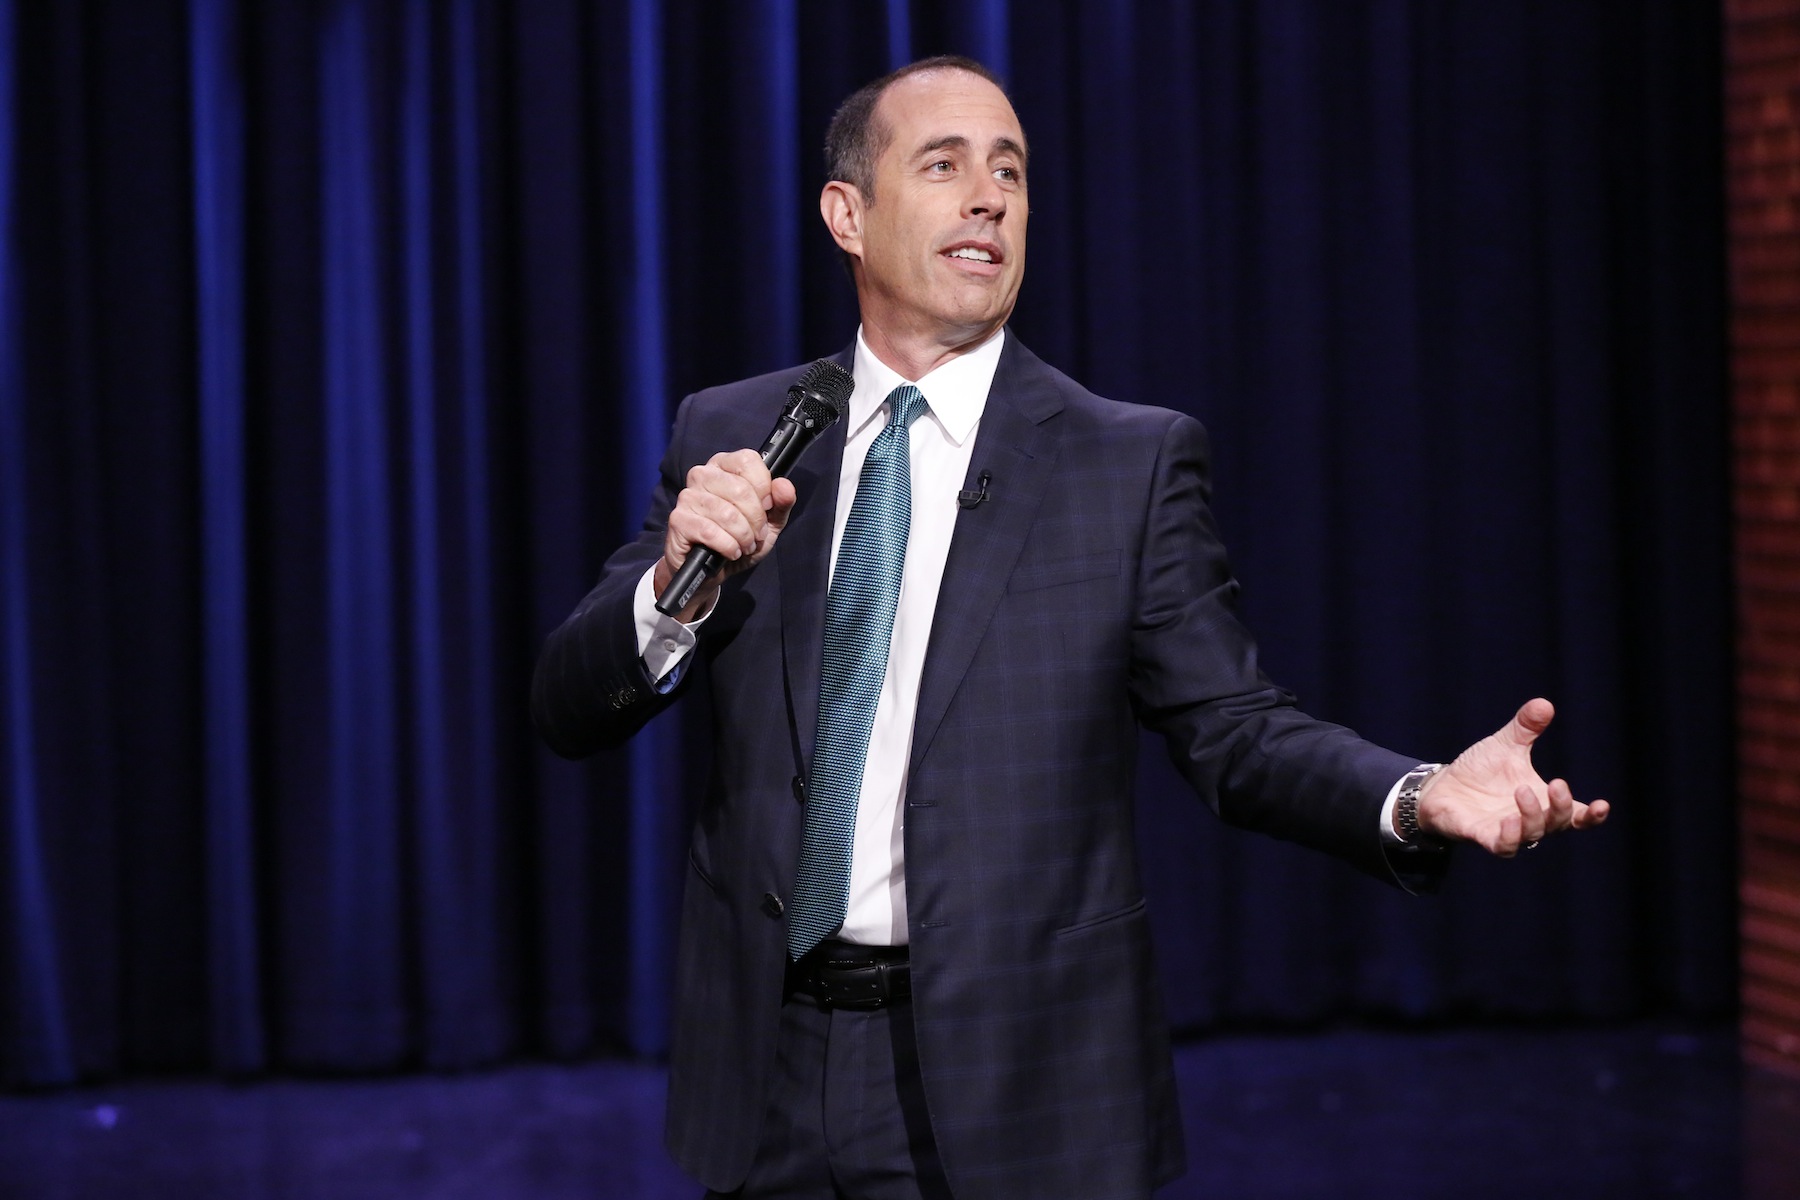 Jerry Seinfeld on The Tonight Show on Feb. 18, 2014 (Lloyd Bishop—NBC / Getty Images)